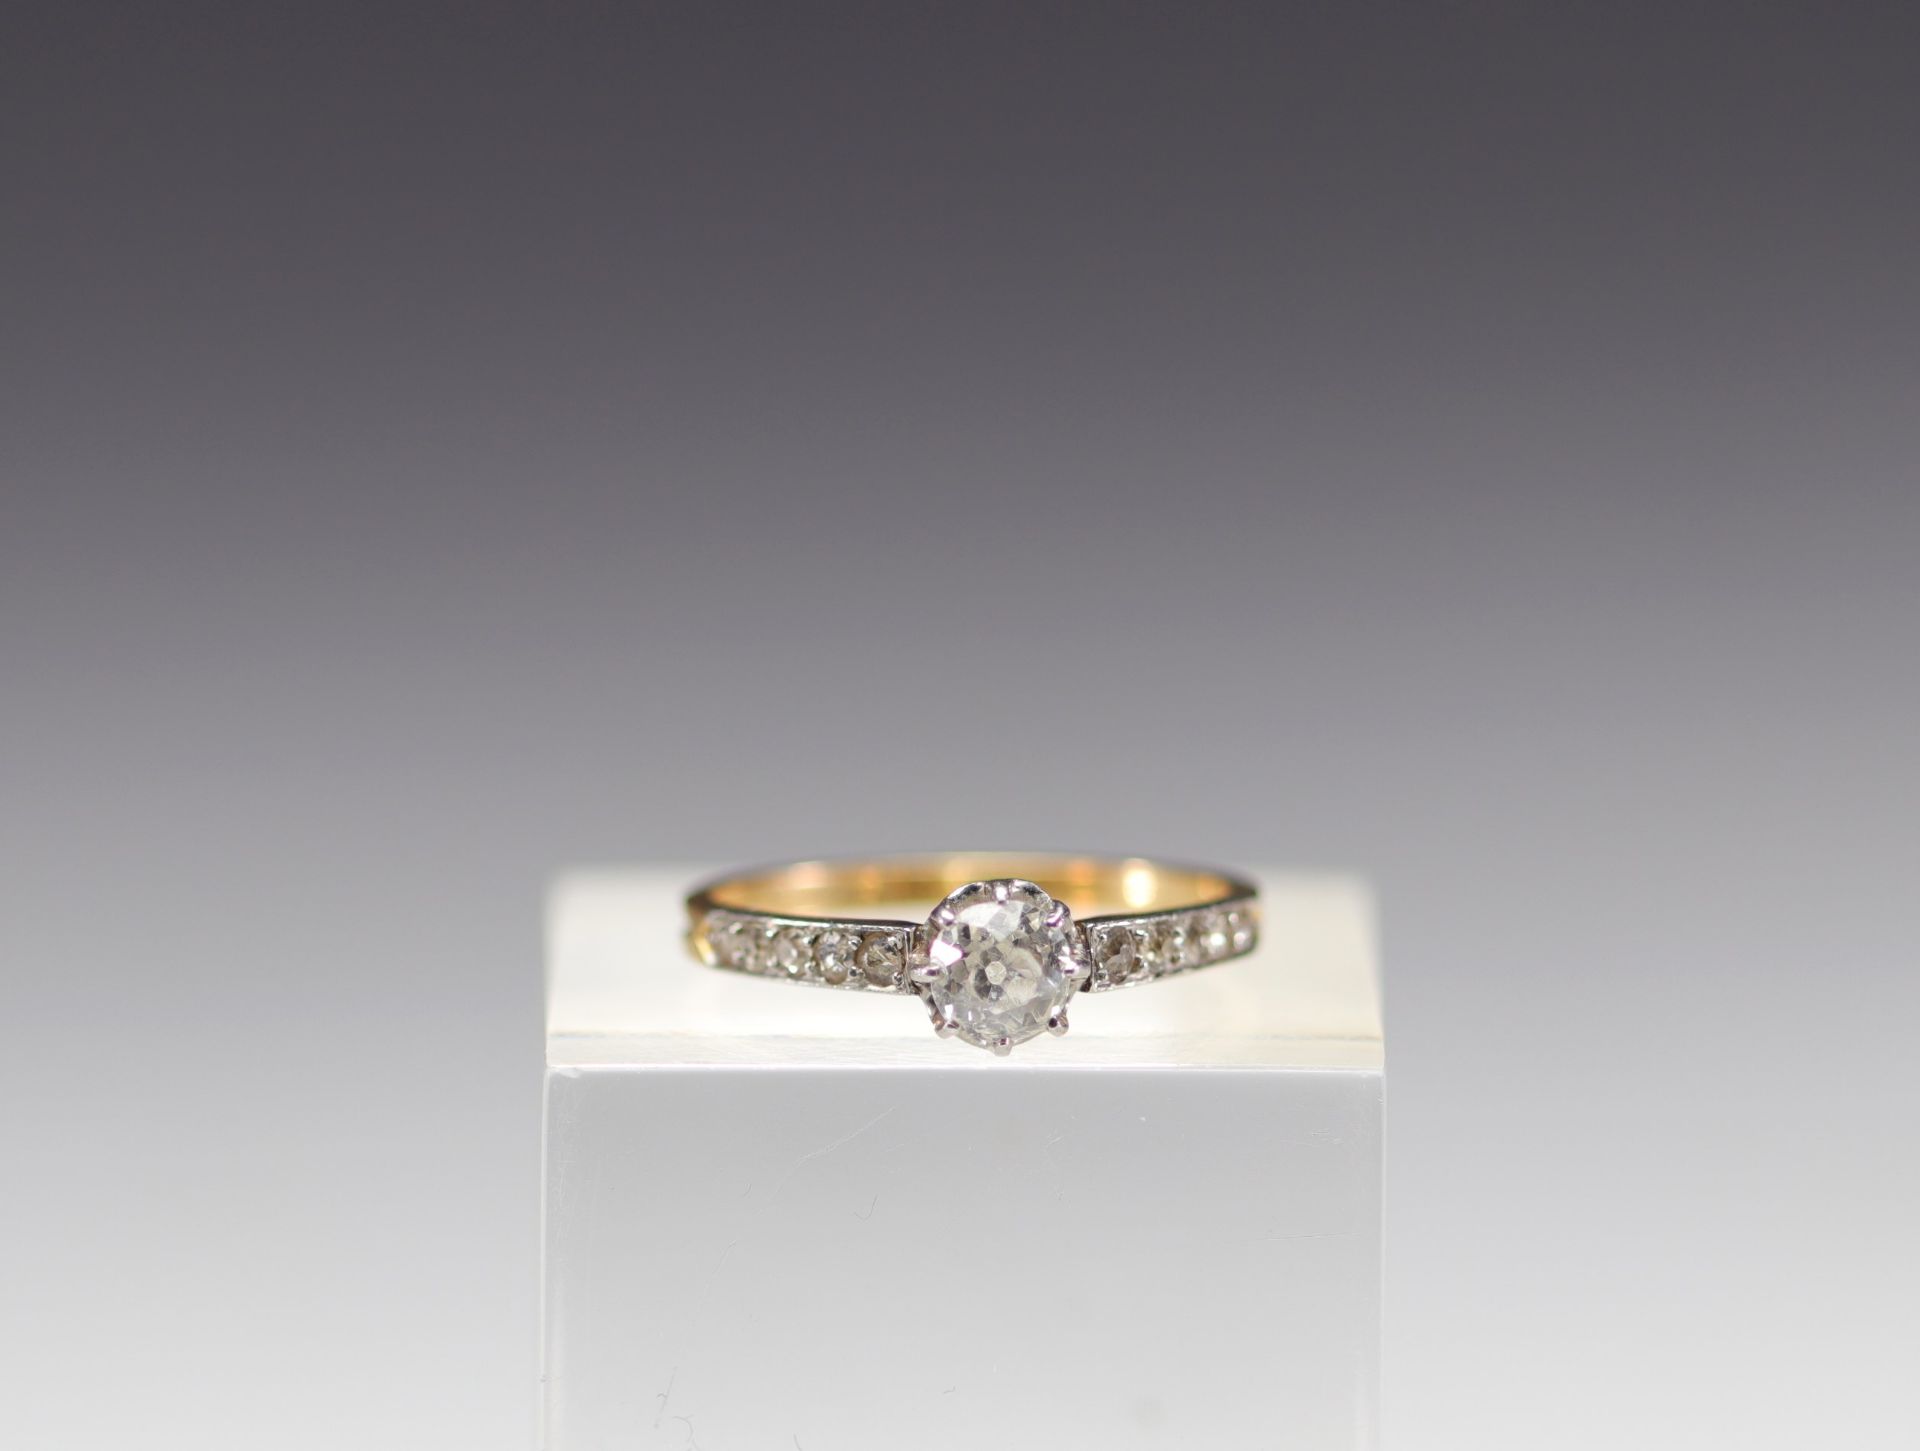 Ring in 18k gold with a central 0.5 carat diamond weighing 2.4g.